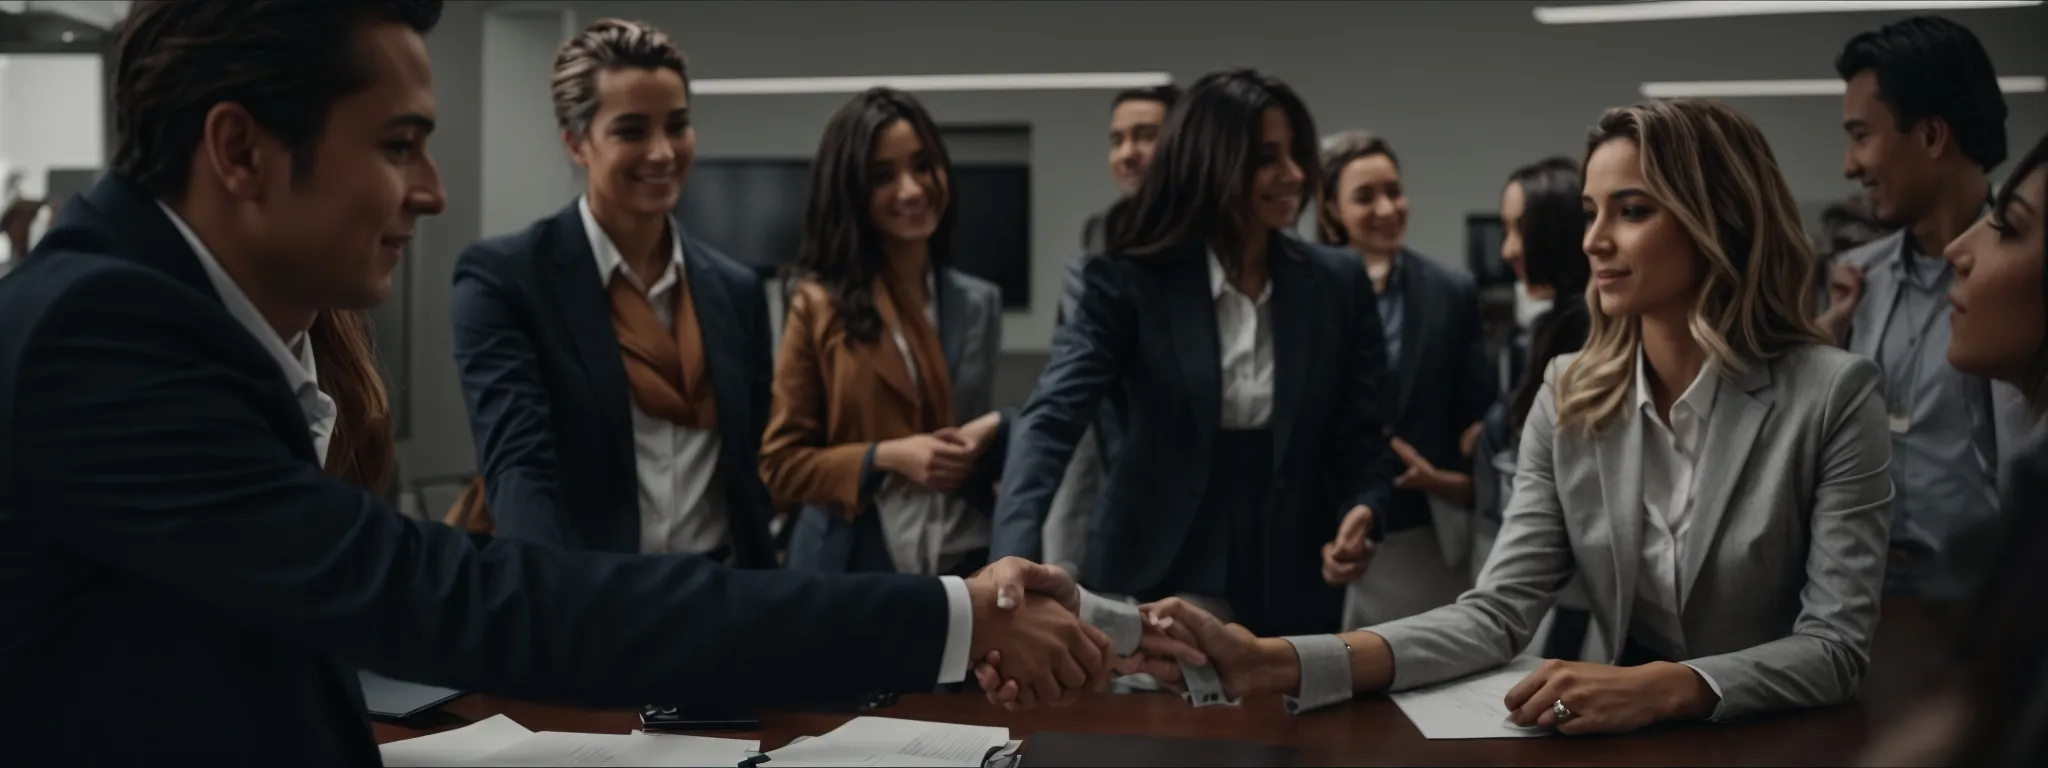 a group of professionals shaking hands in a meeting room, symbolizing partnership and collaboration.